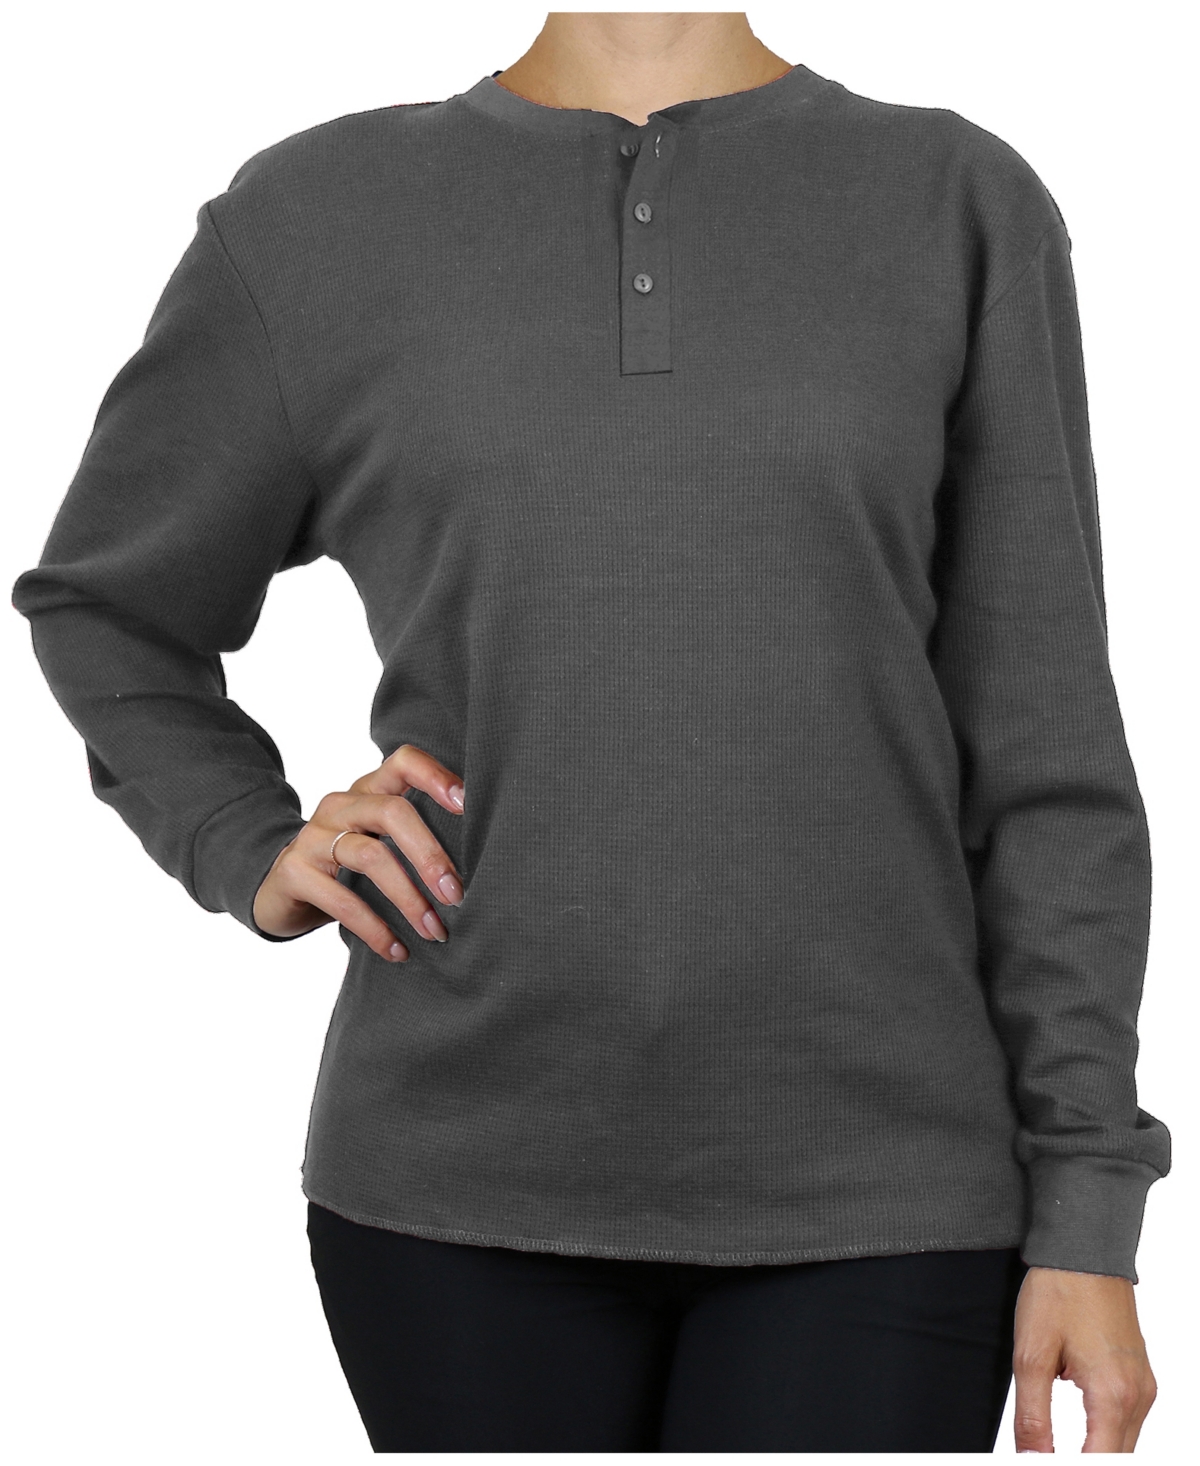 Galaxy By Harvic Women's Oversize Loose Fitting Waffle-knit Henley Thermal Sweater In Charcoal